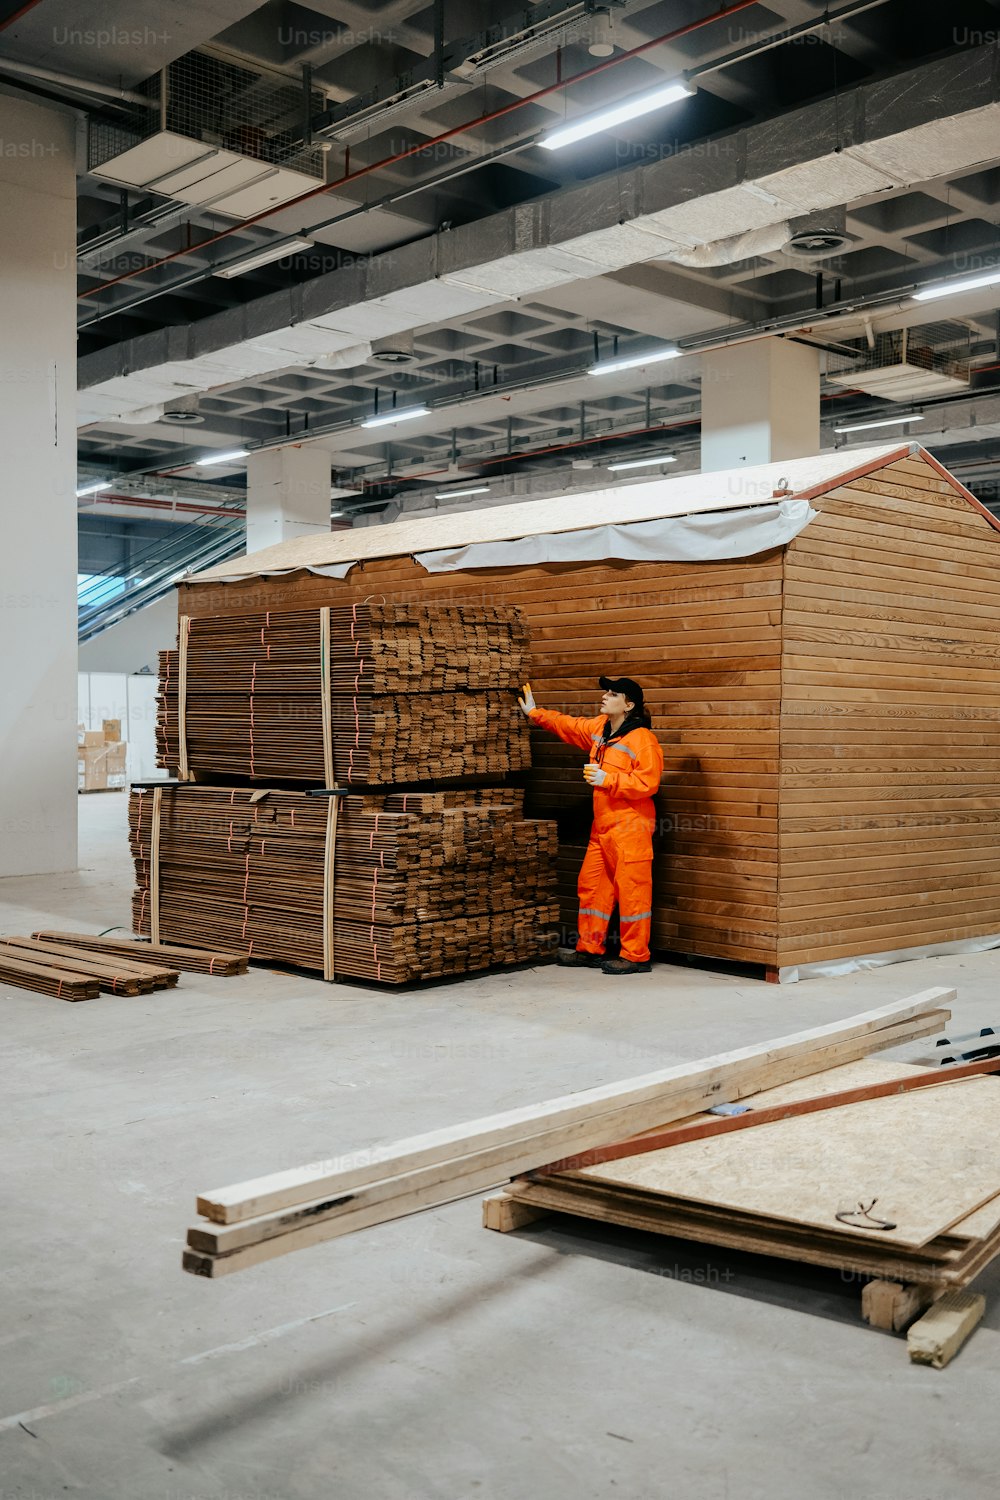 a person in an orange jumpsuit standing next to stacks of wood